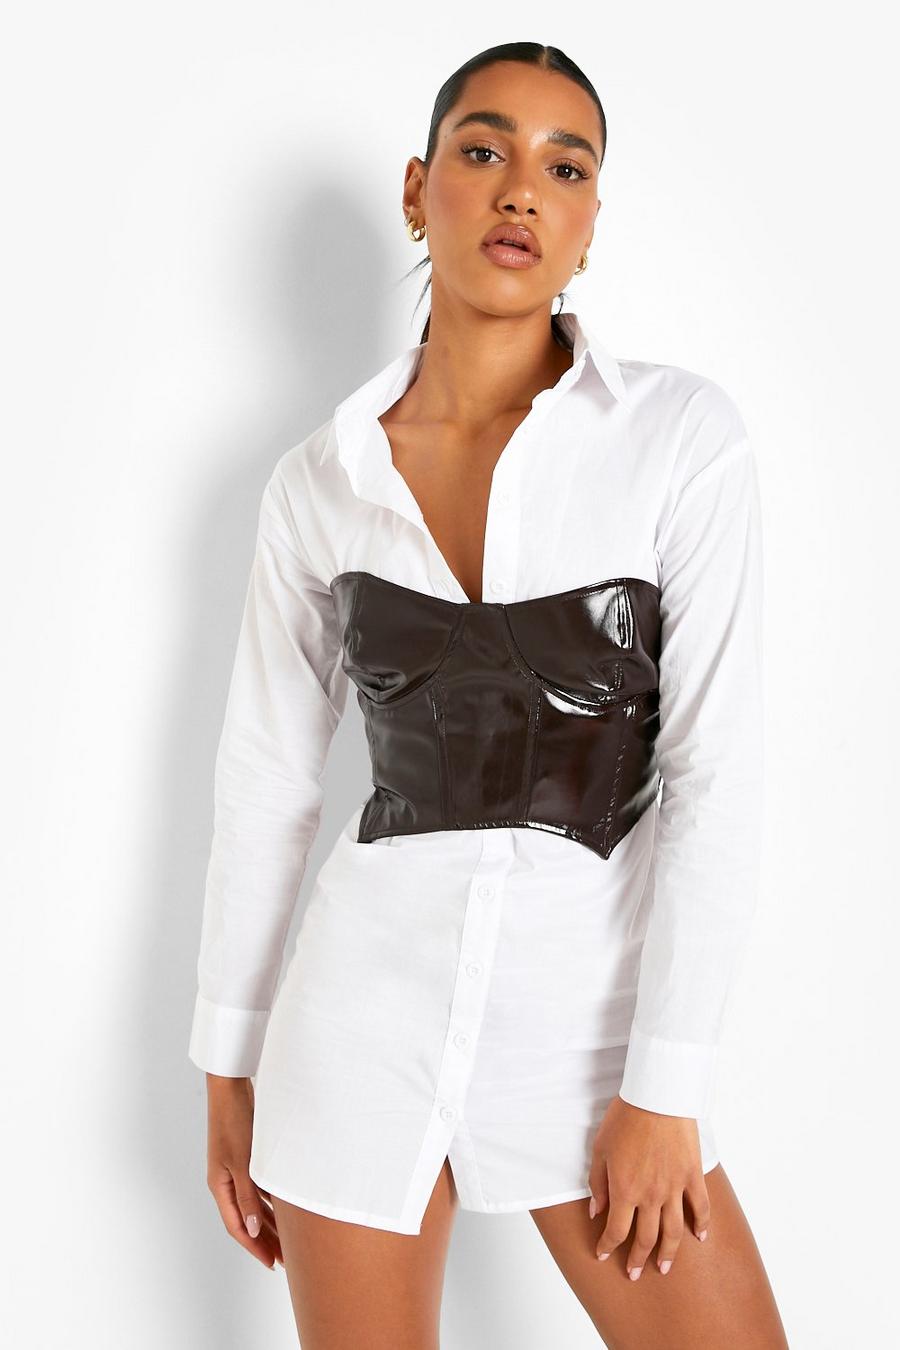 Black Corset, White Shirtdress  Falling in Love With Corsets? We